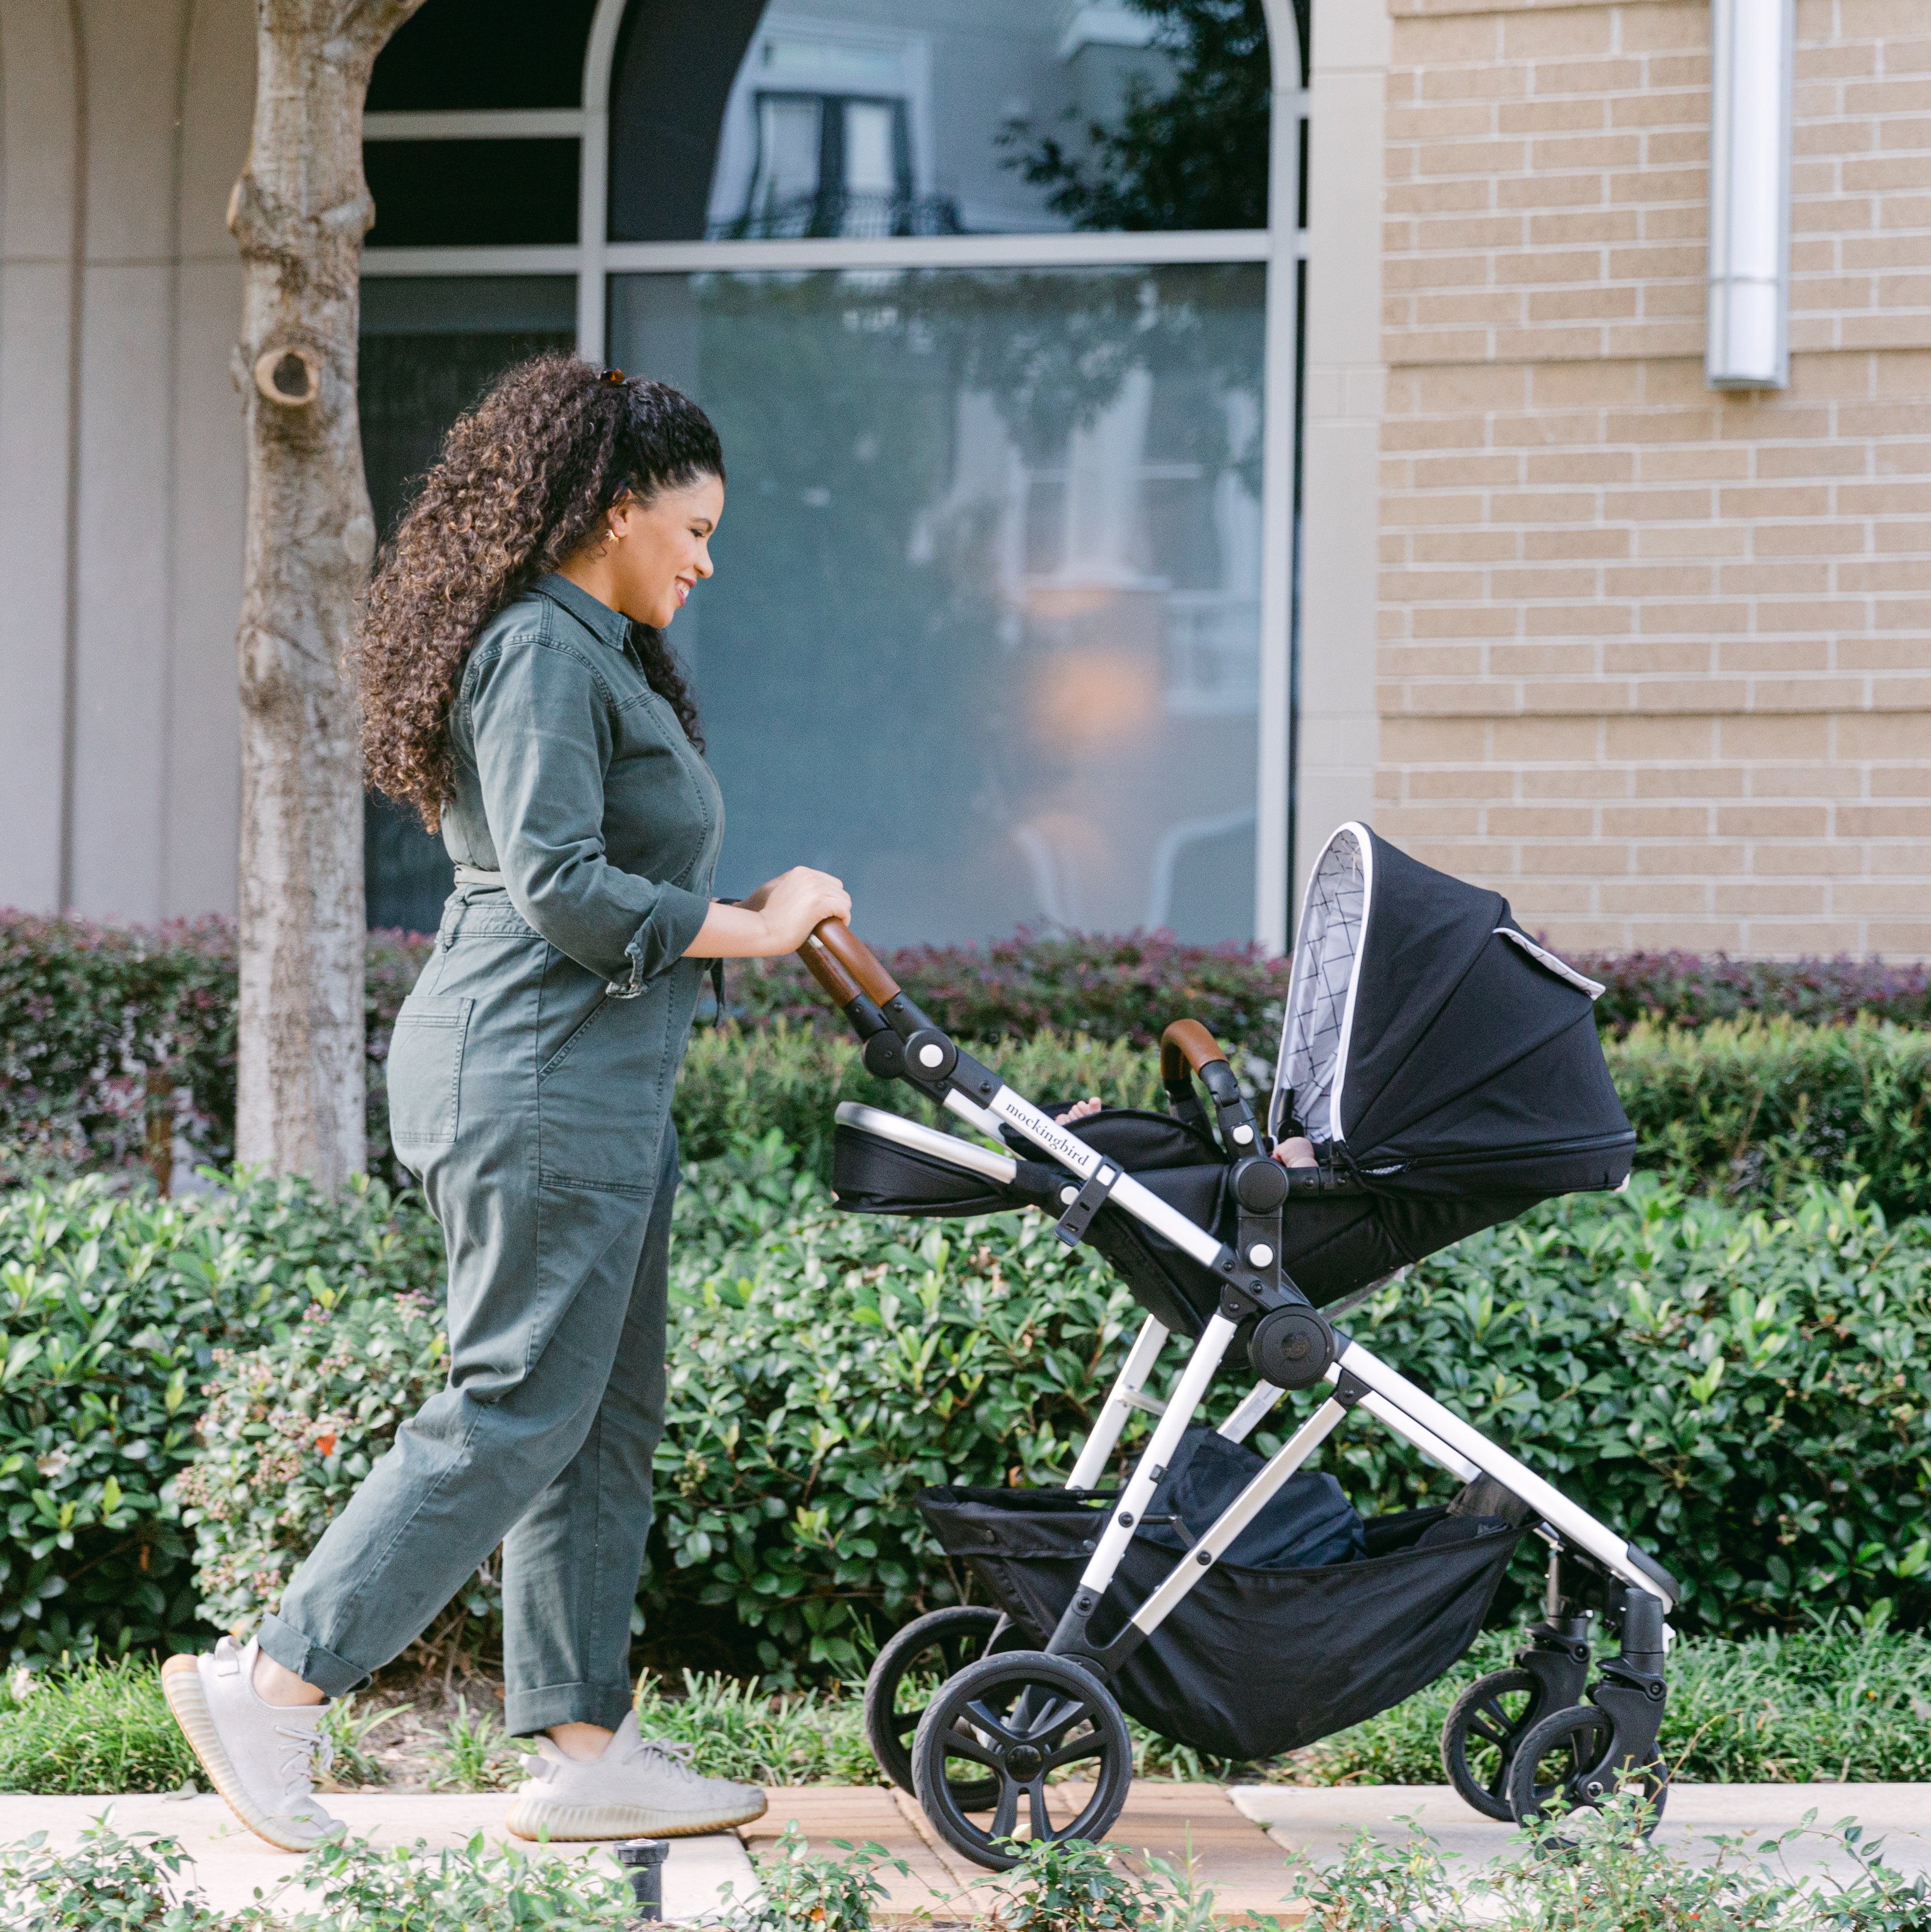 A woman in a green jumpsuit pushing a baby stroller along a sidewalk next to a building with large windows and green shrubbery.